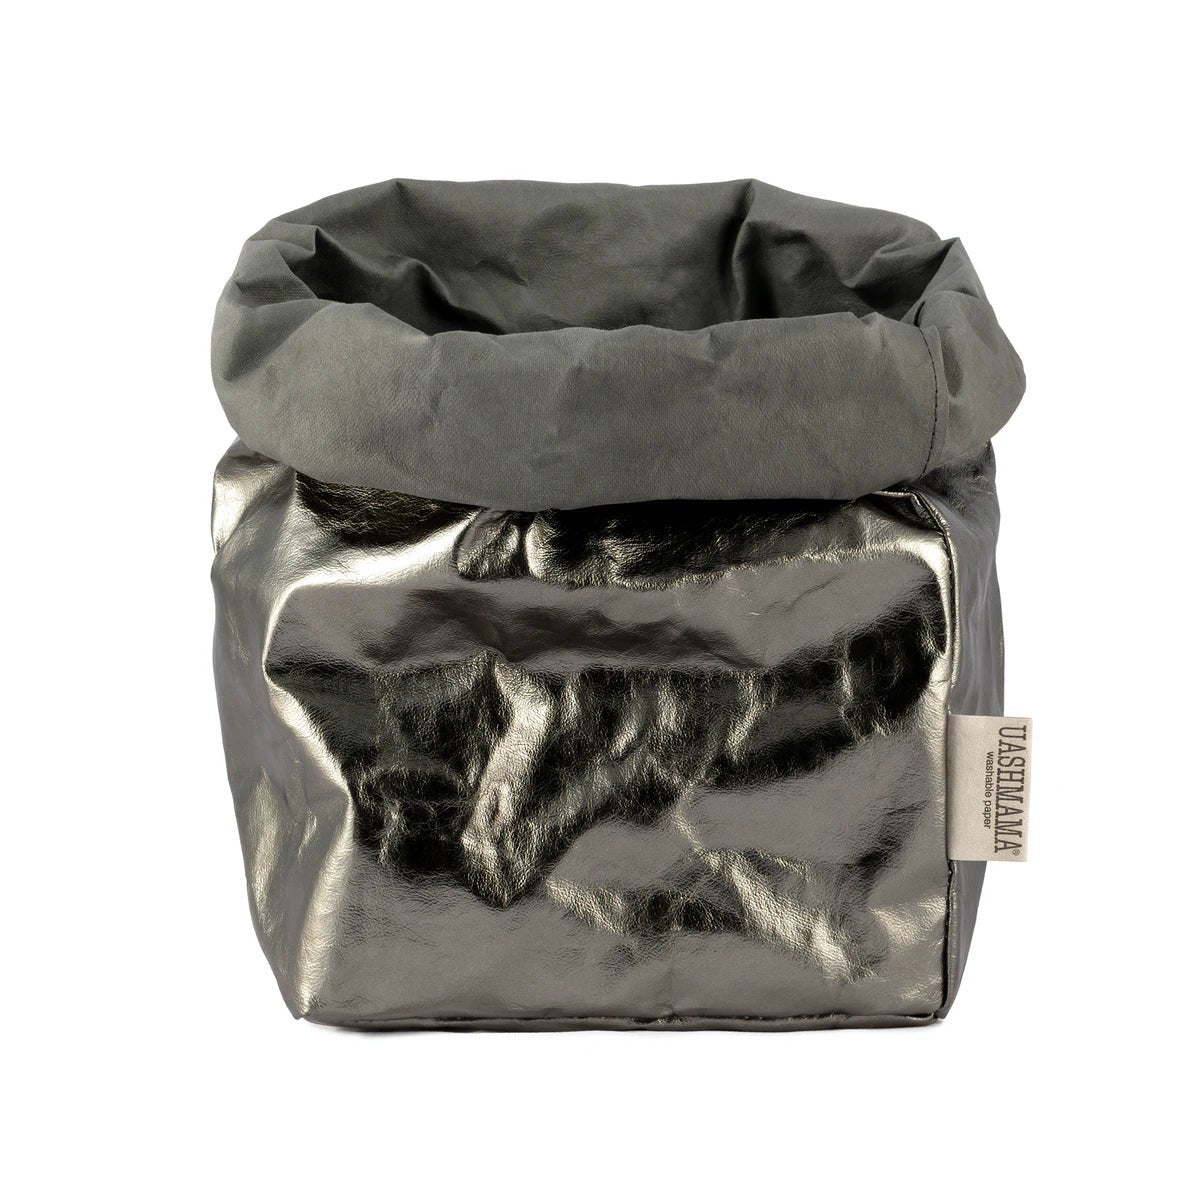 A washable paper bag is shown. The bag is rolled down at the top and features a UASHMAMA logo label on the bottom left corner. The bag pictured is the large plus size in metallic dark grey.